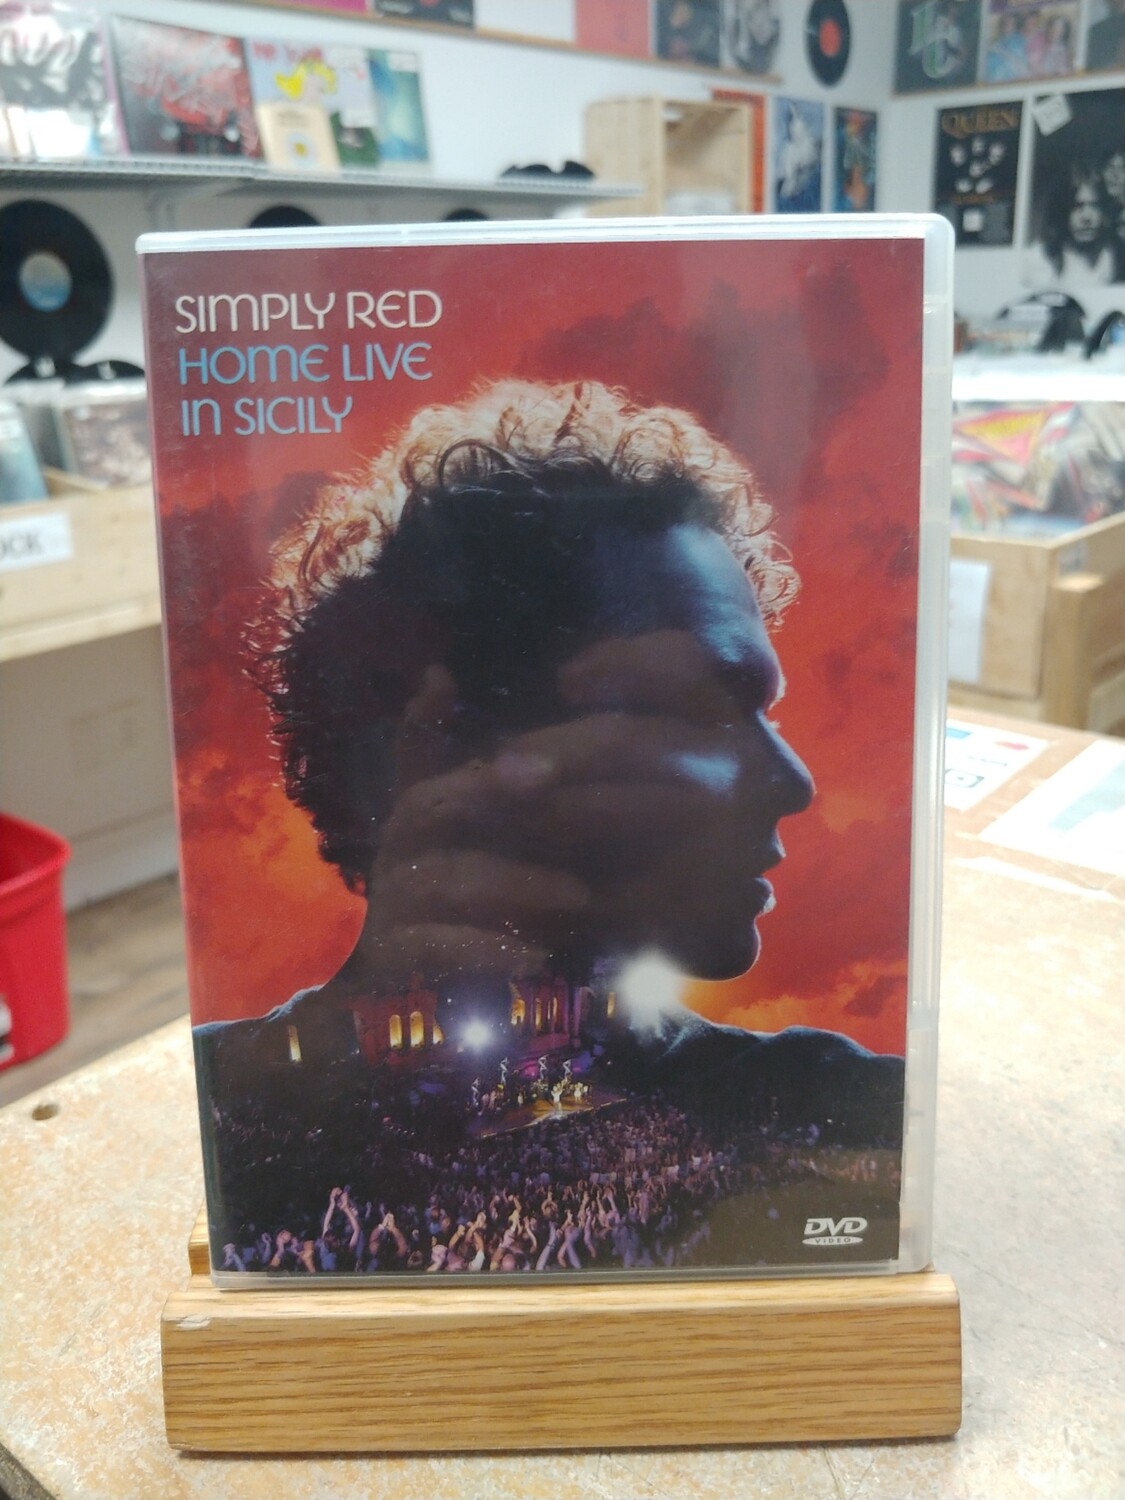 Simply Mind - Home Live in Sicily (DVD)